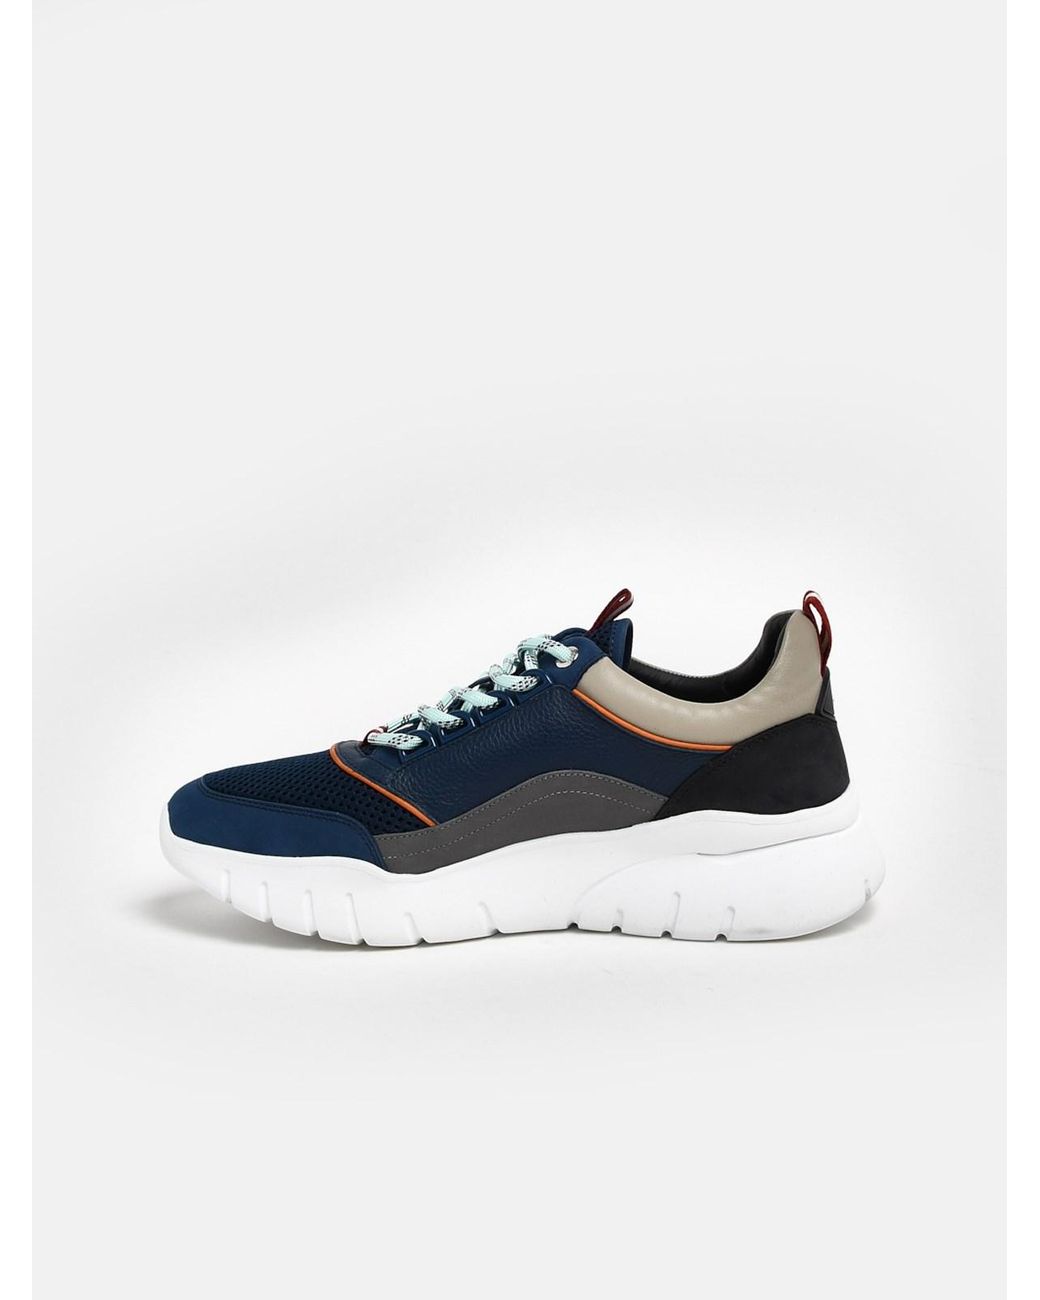 Bally Leather Blue T 118 Birky Sneakers 